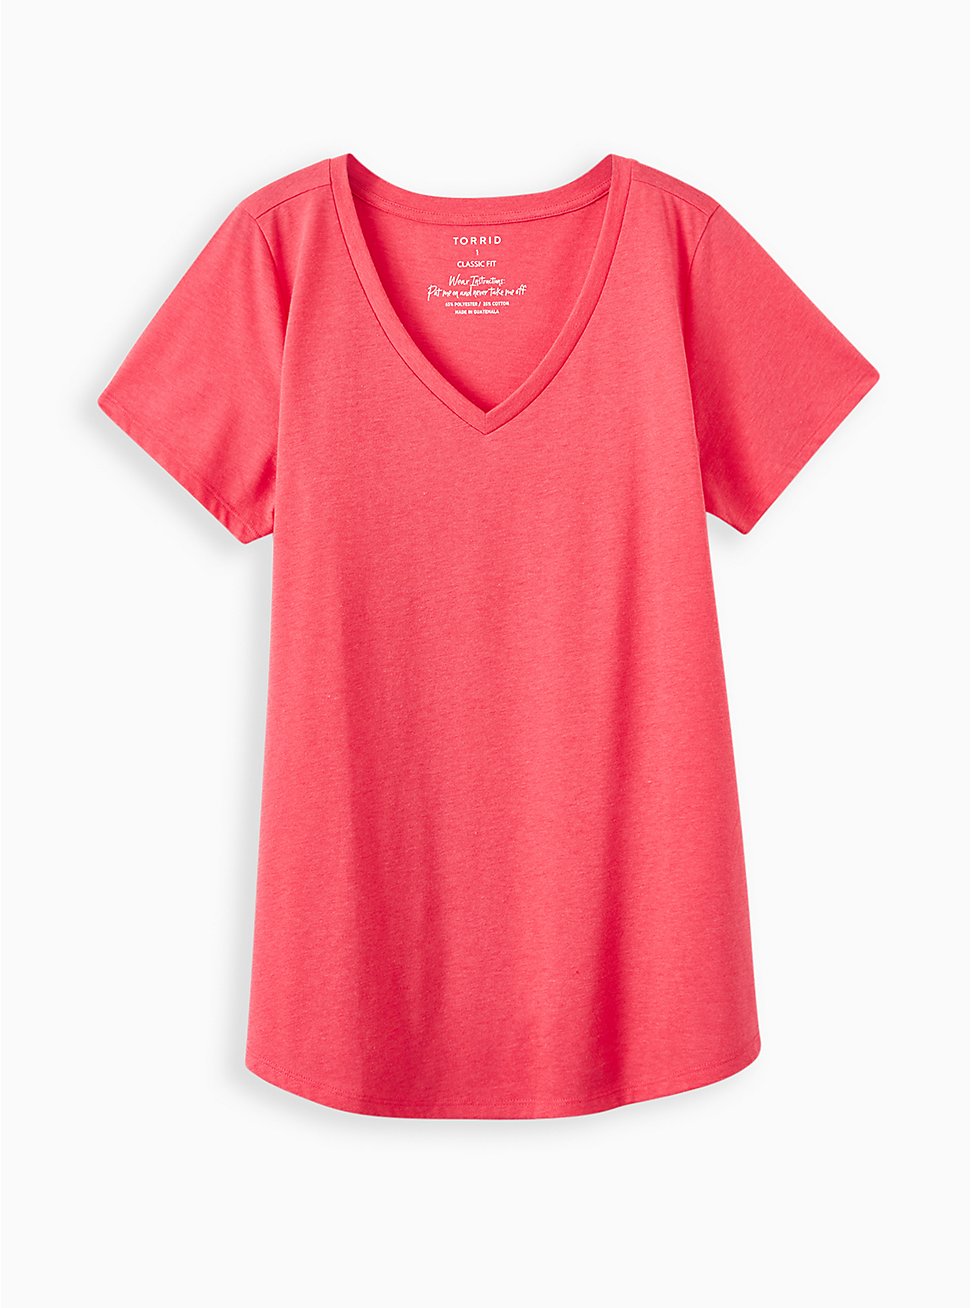 Girlfriend Tee - Signature Jersey Bright Berry, TEABERRY, hi-res